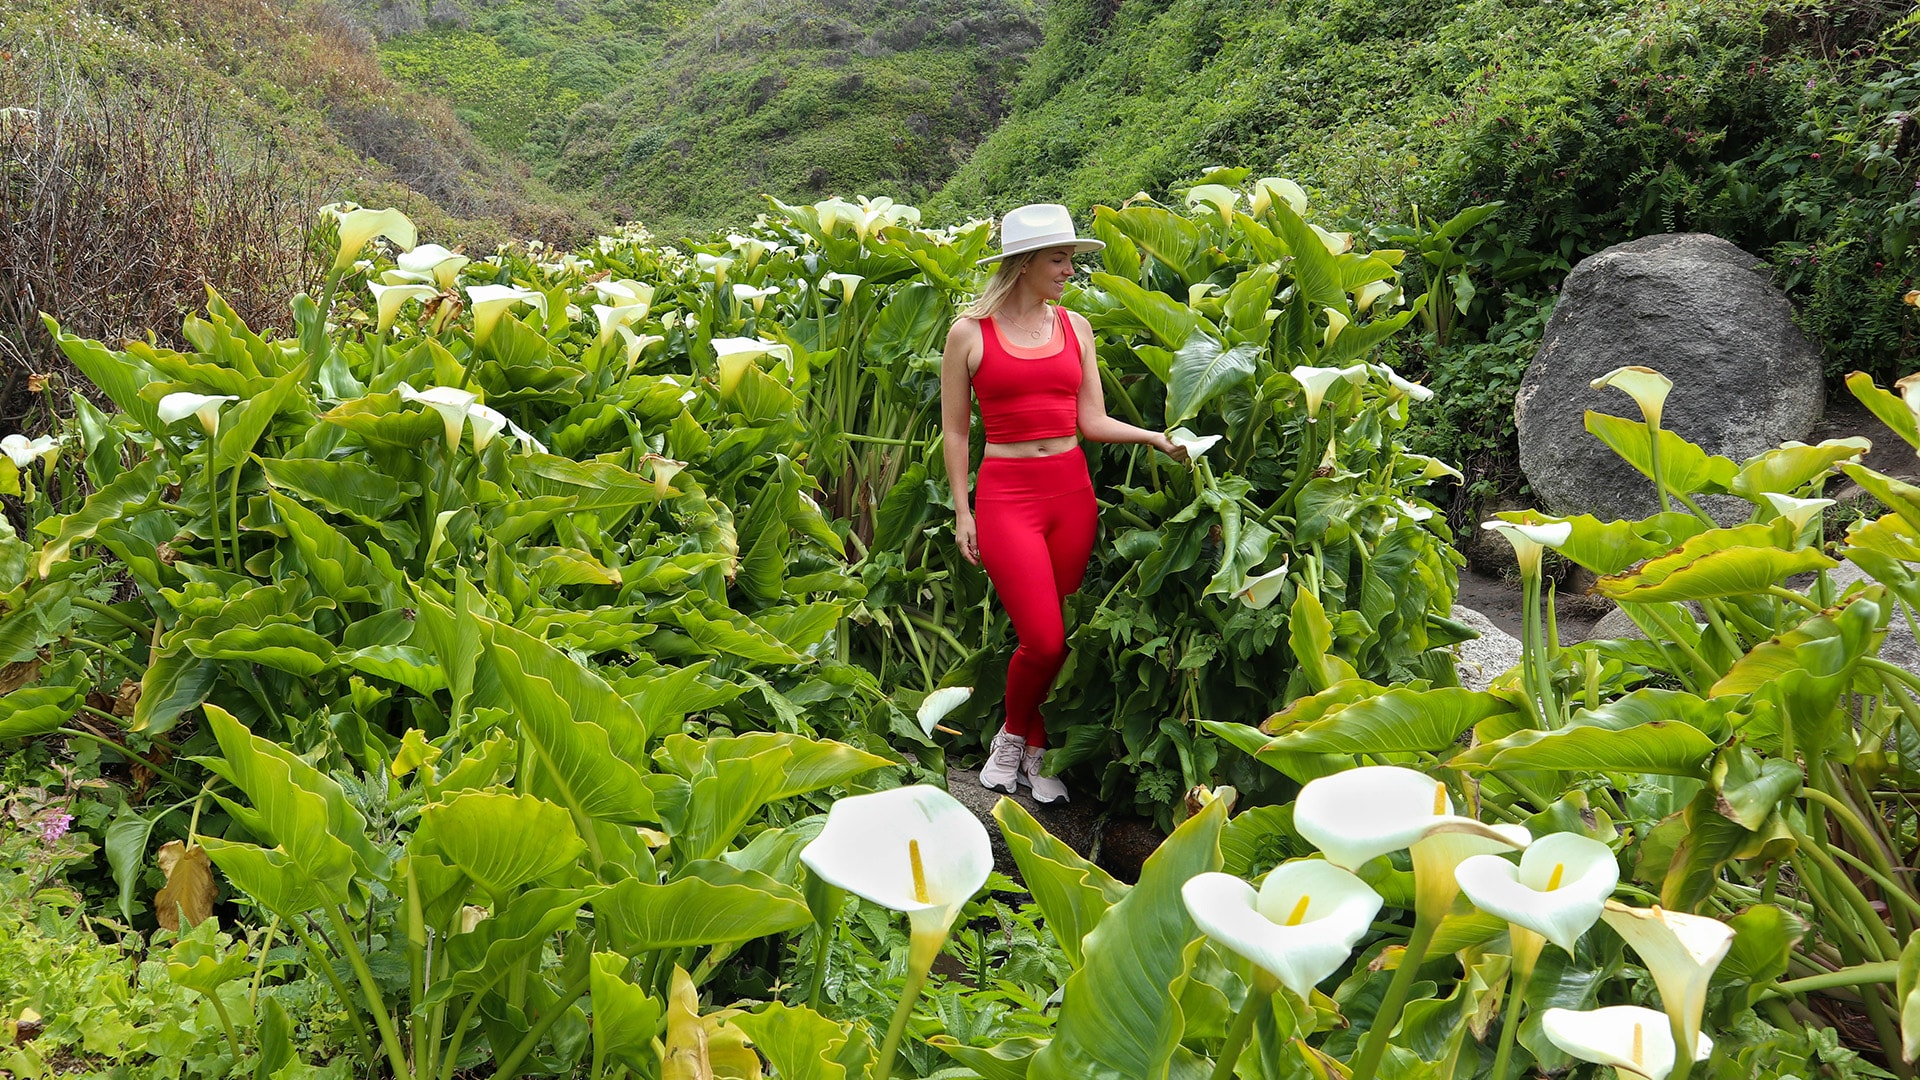  The author walks in the Calla Lily Valley at Garrapata Beach, California.